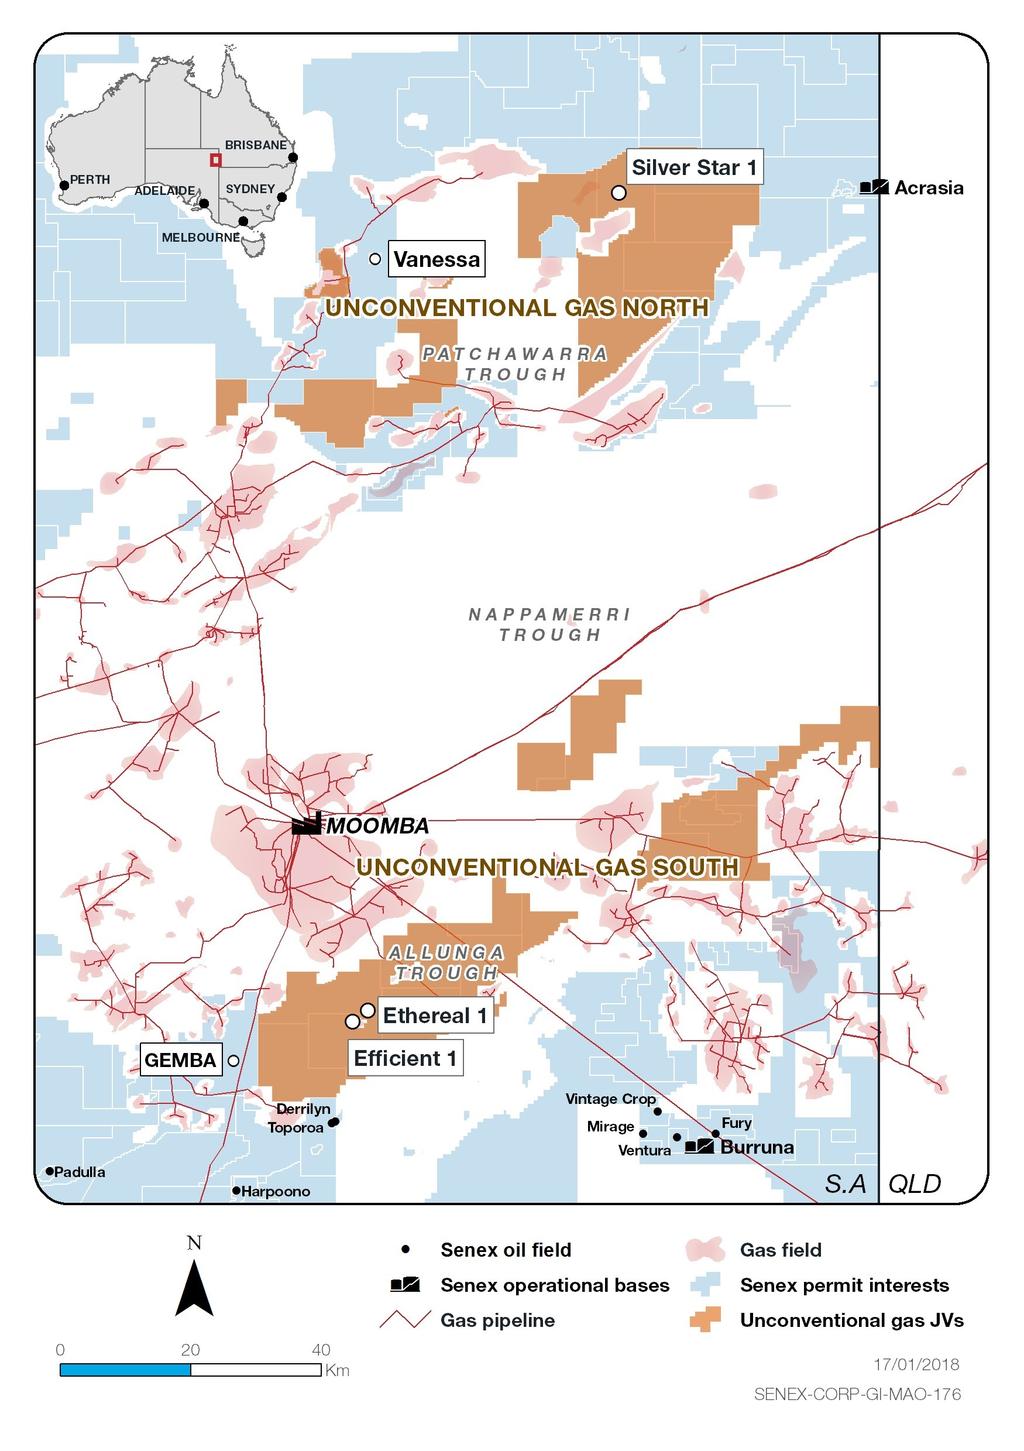 ly Report EAST COAST GAS BUSINESS COOPER BASIN Exploration and Development Vanessa gas field Senex is on track to bring the Vanessa gas field (PEL 182: Senex 57% and operator) online in Q4 FY18,